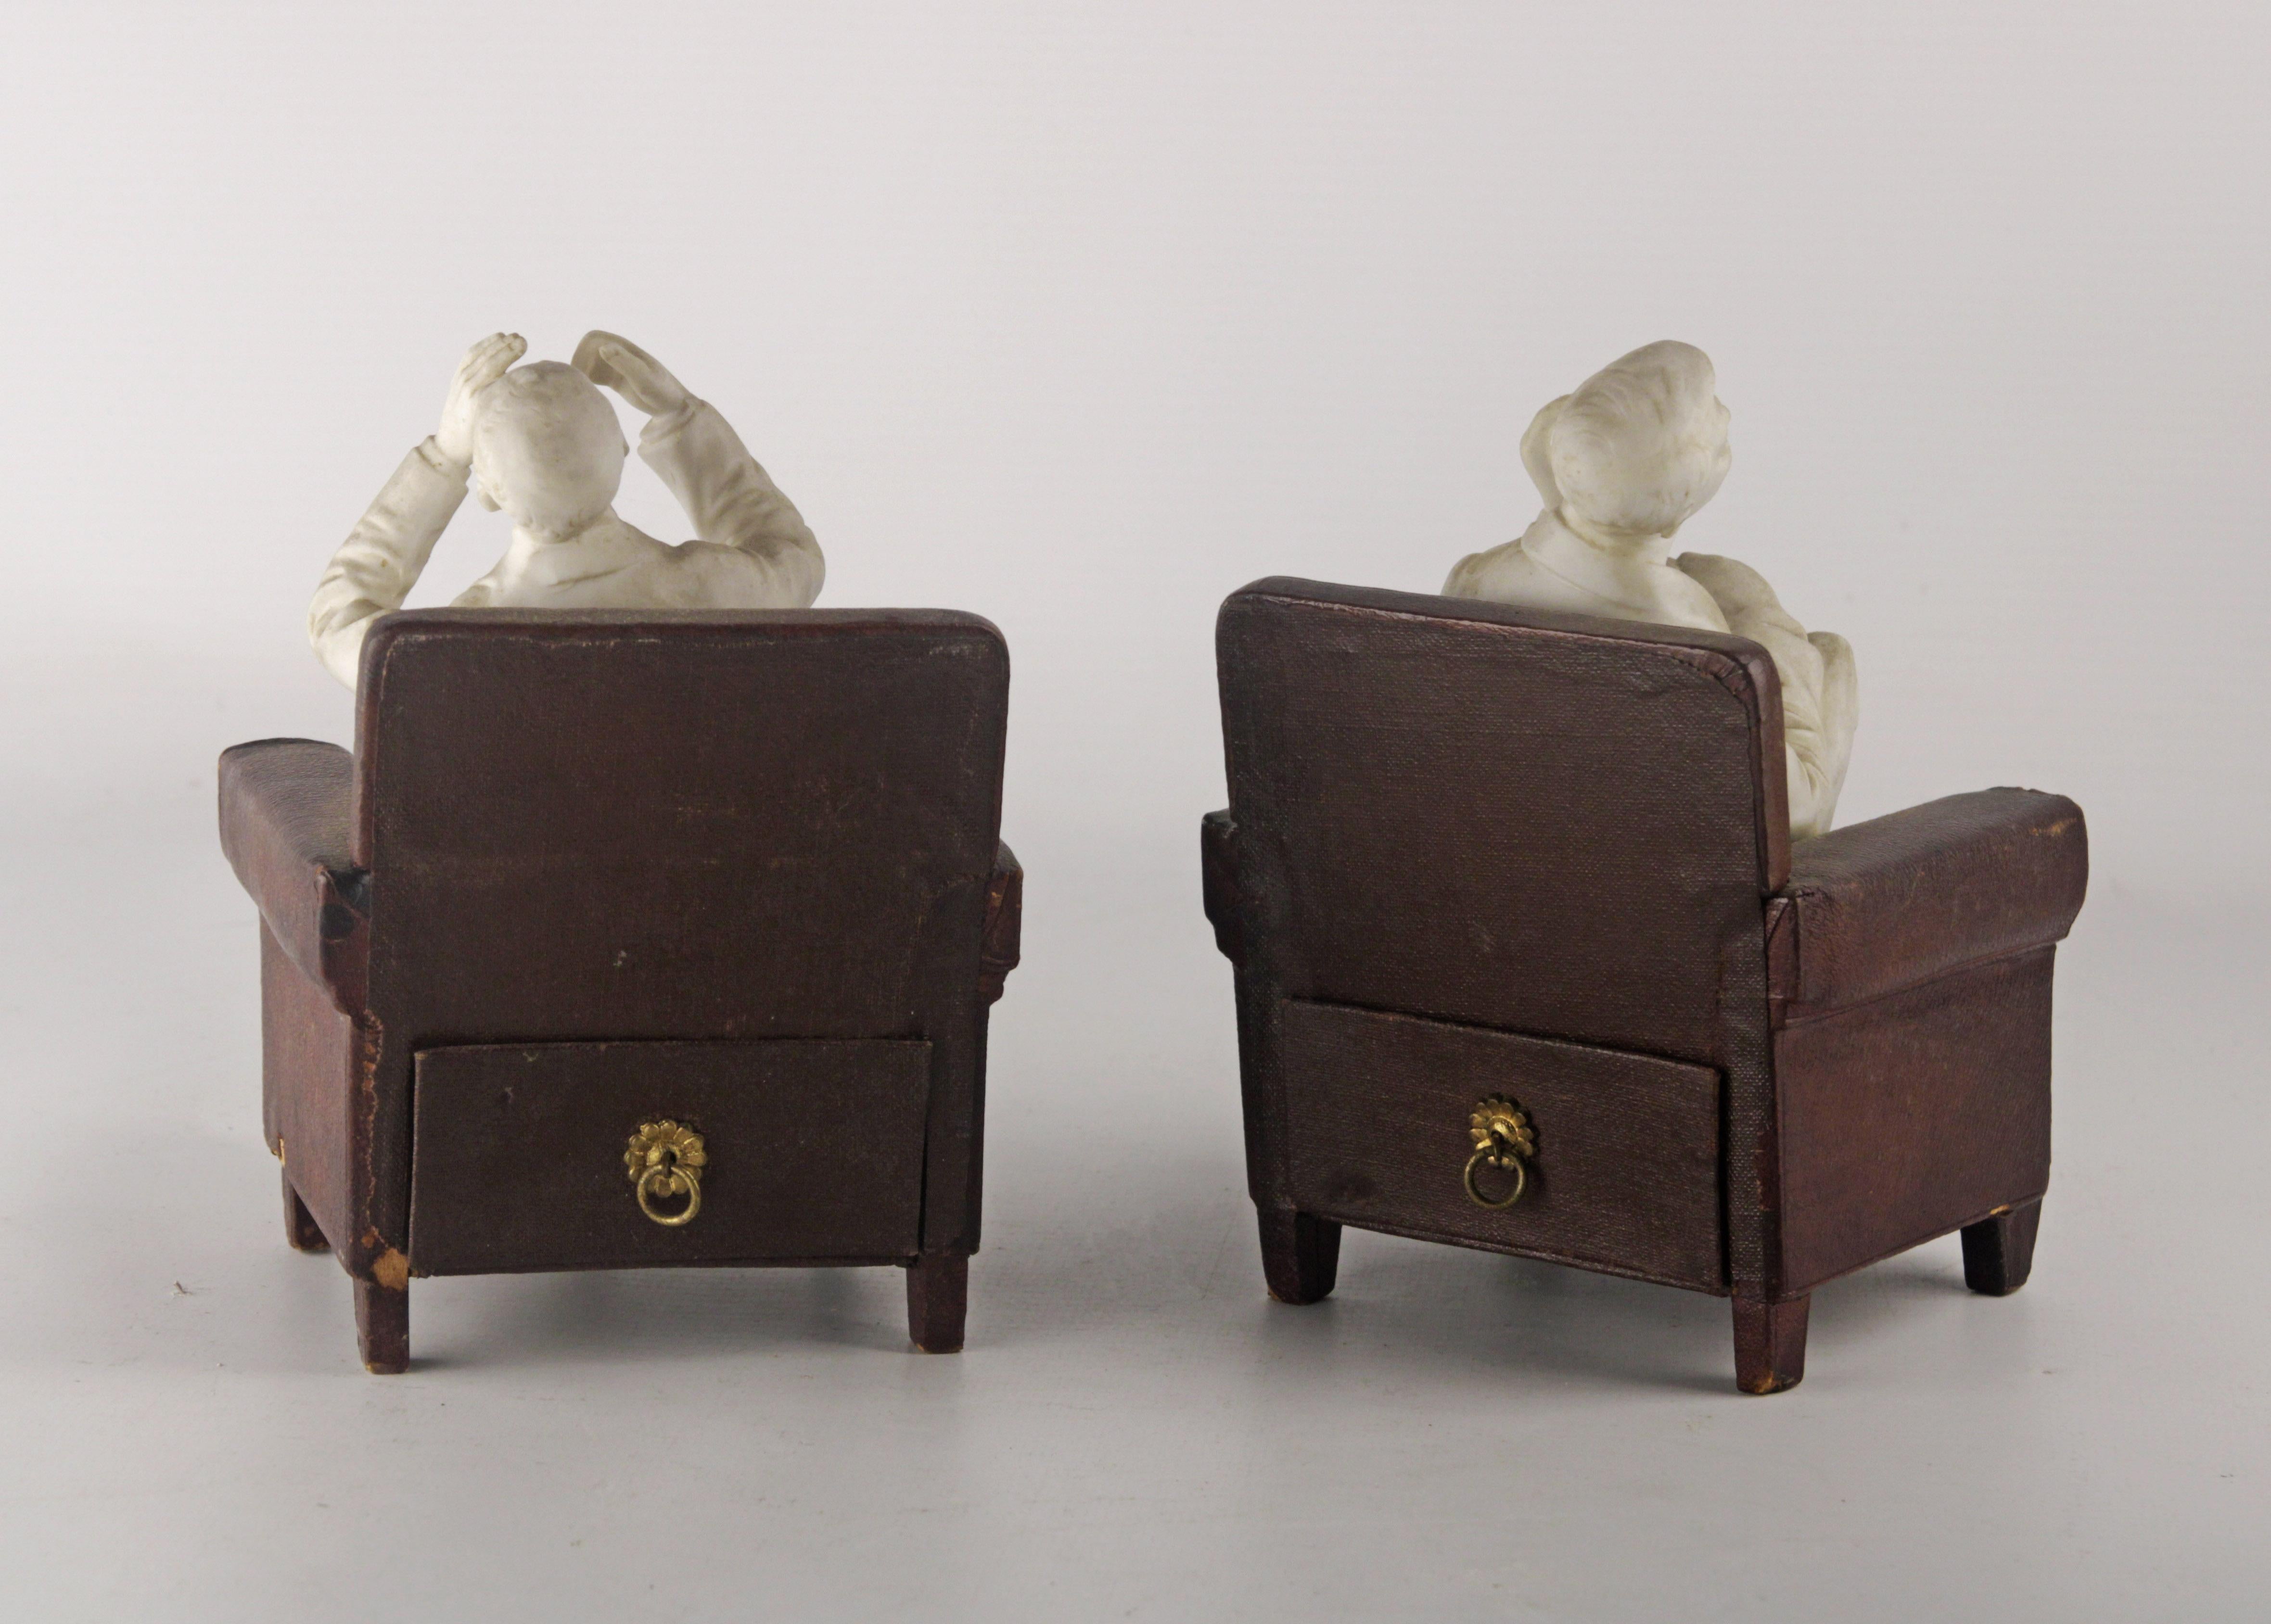 Molded Pair of 20th Century Decorative Biscuit Porcelain Sculptures with Jewelry Boxes For Sale